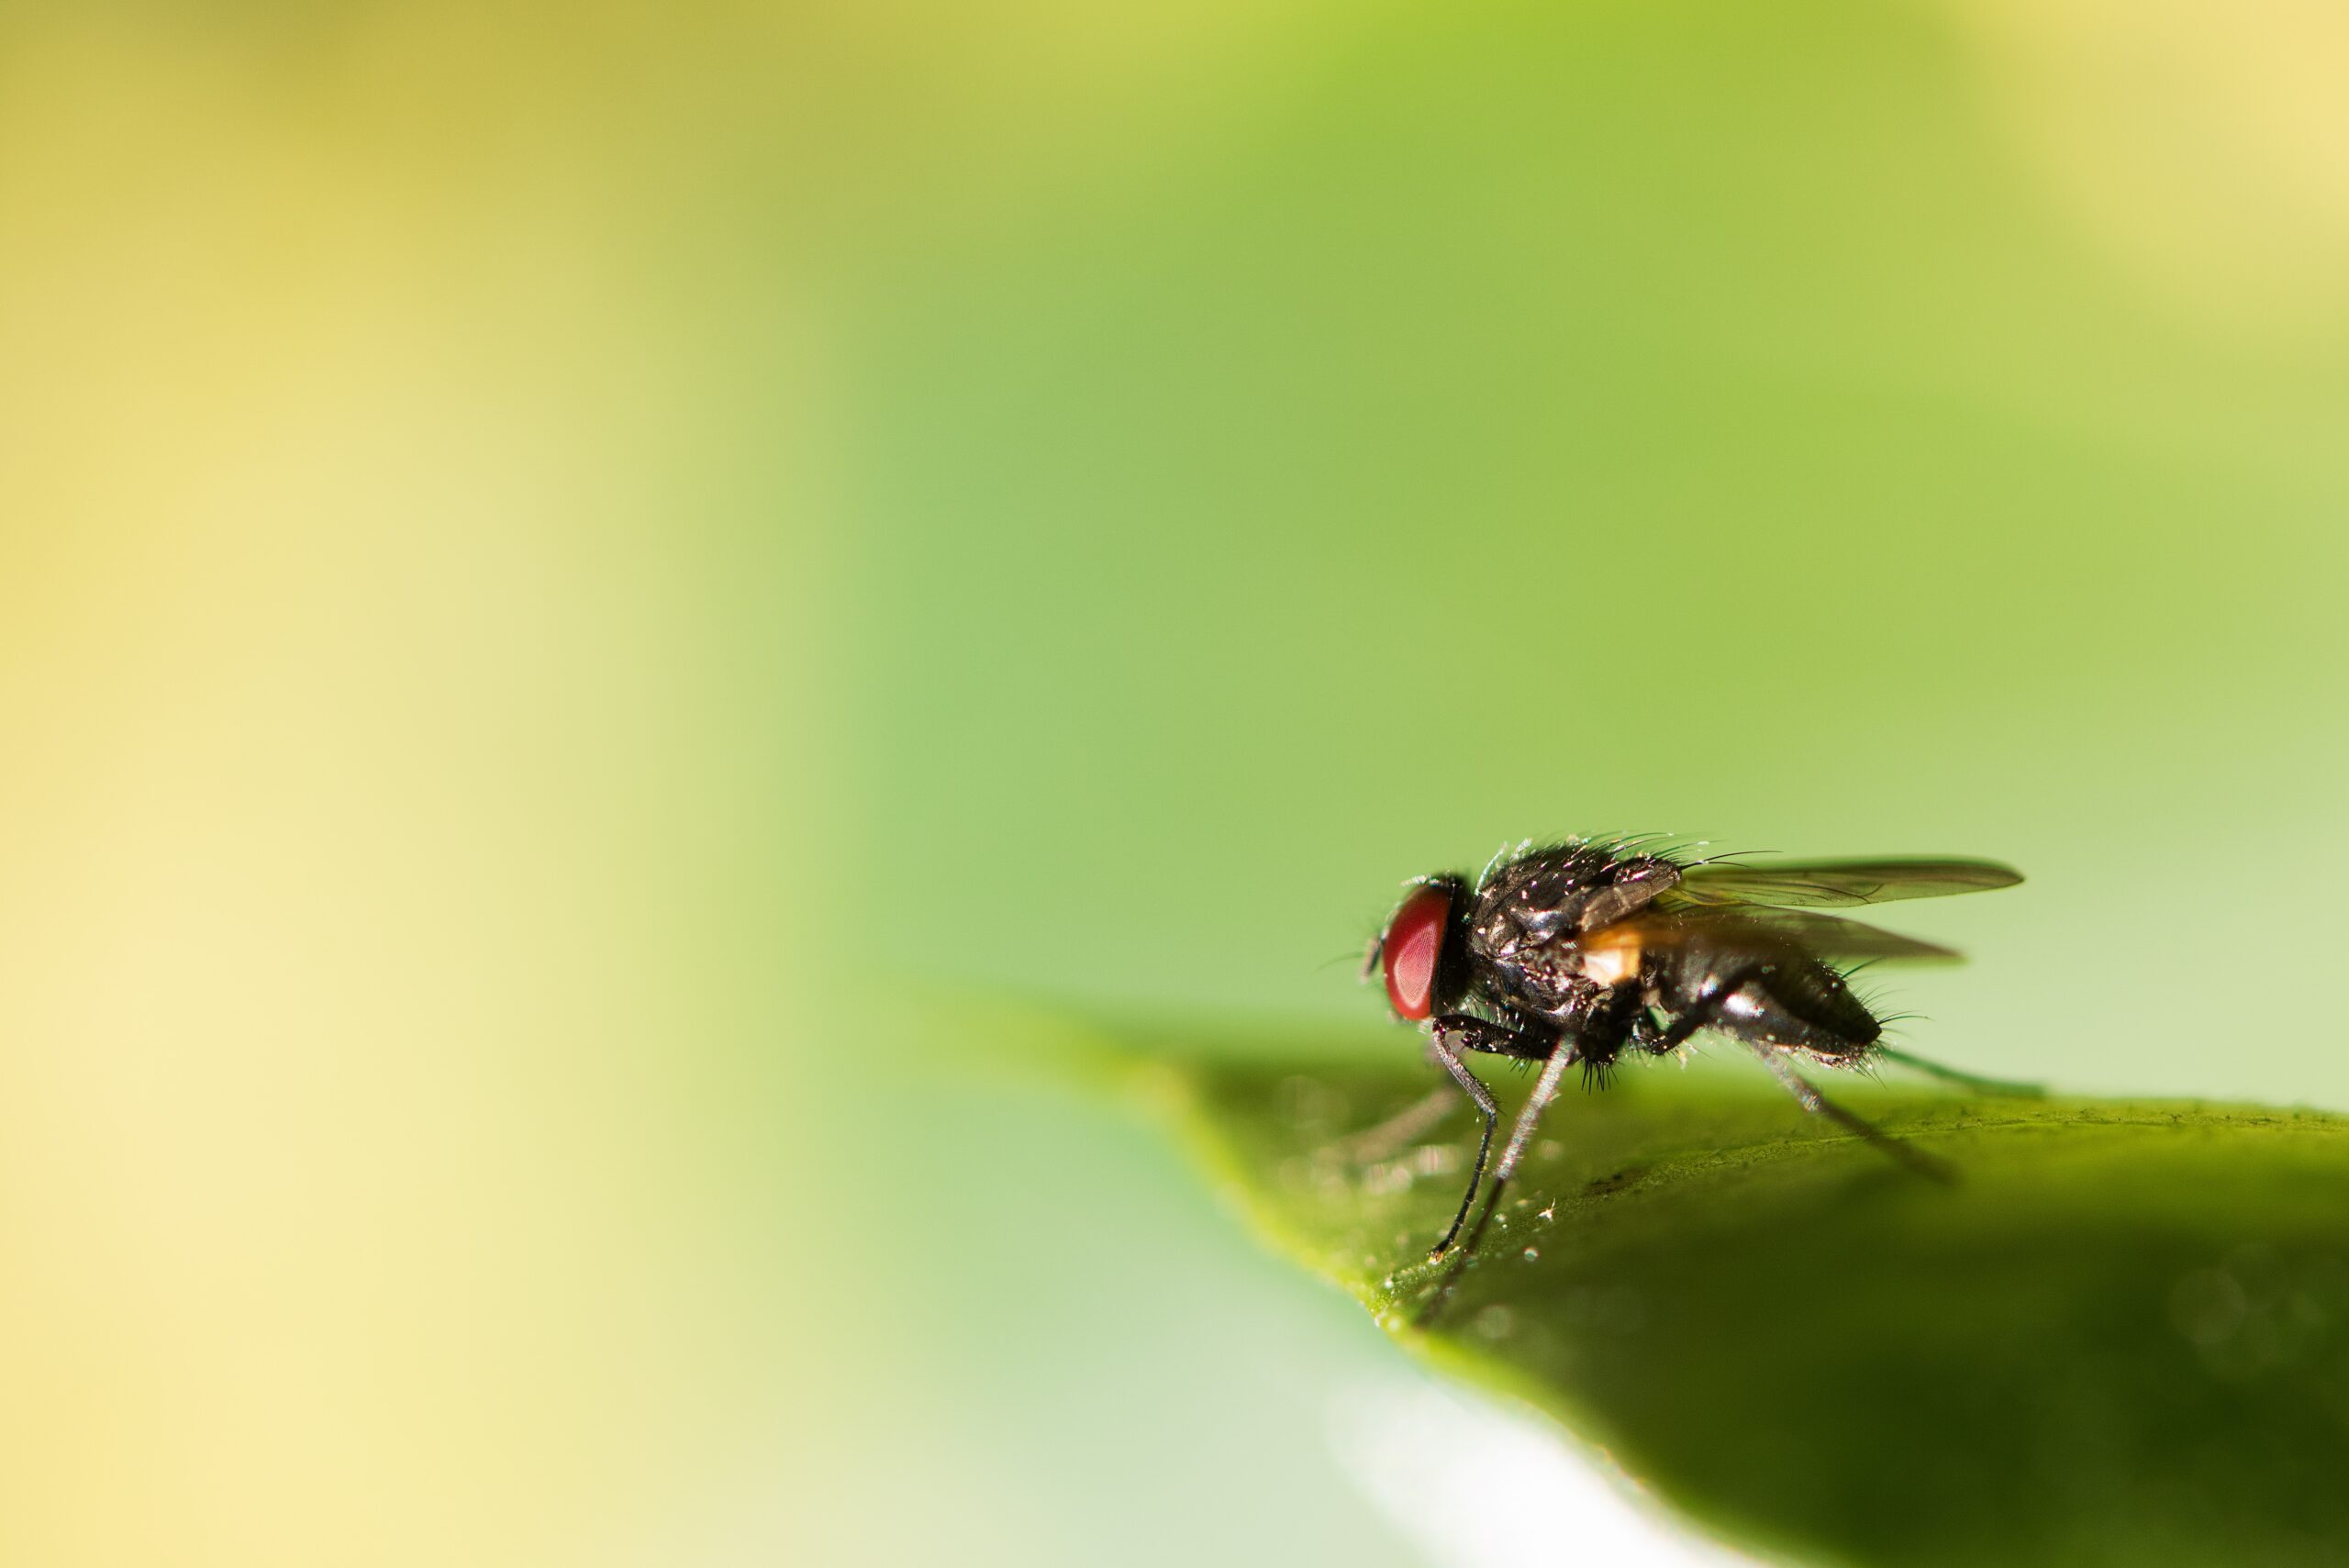 micro photography of black fly on green leaf